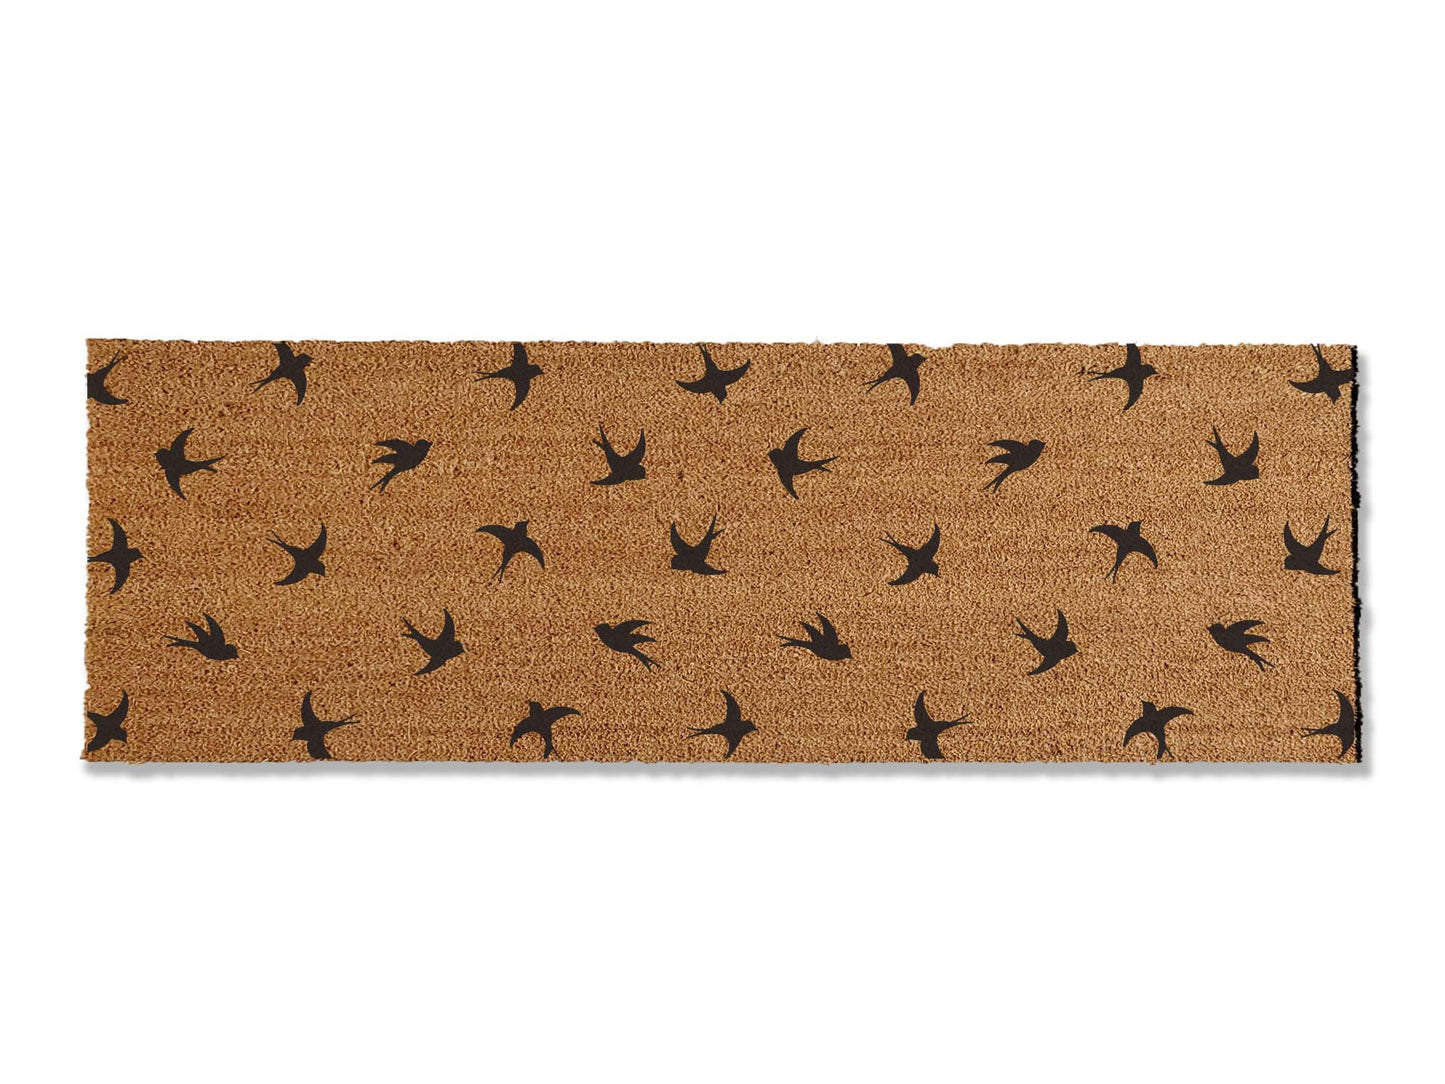 Enhance your entryway with a 1/2 inch thick coir doormat adorned with a beautiful bird pattern. This functional and stylish mat effectively traps dirt, adding a touch of elegance to your home's entrance.